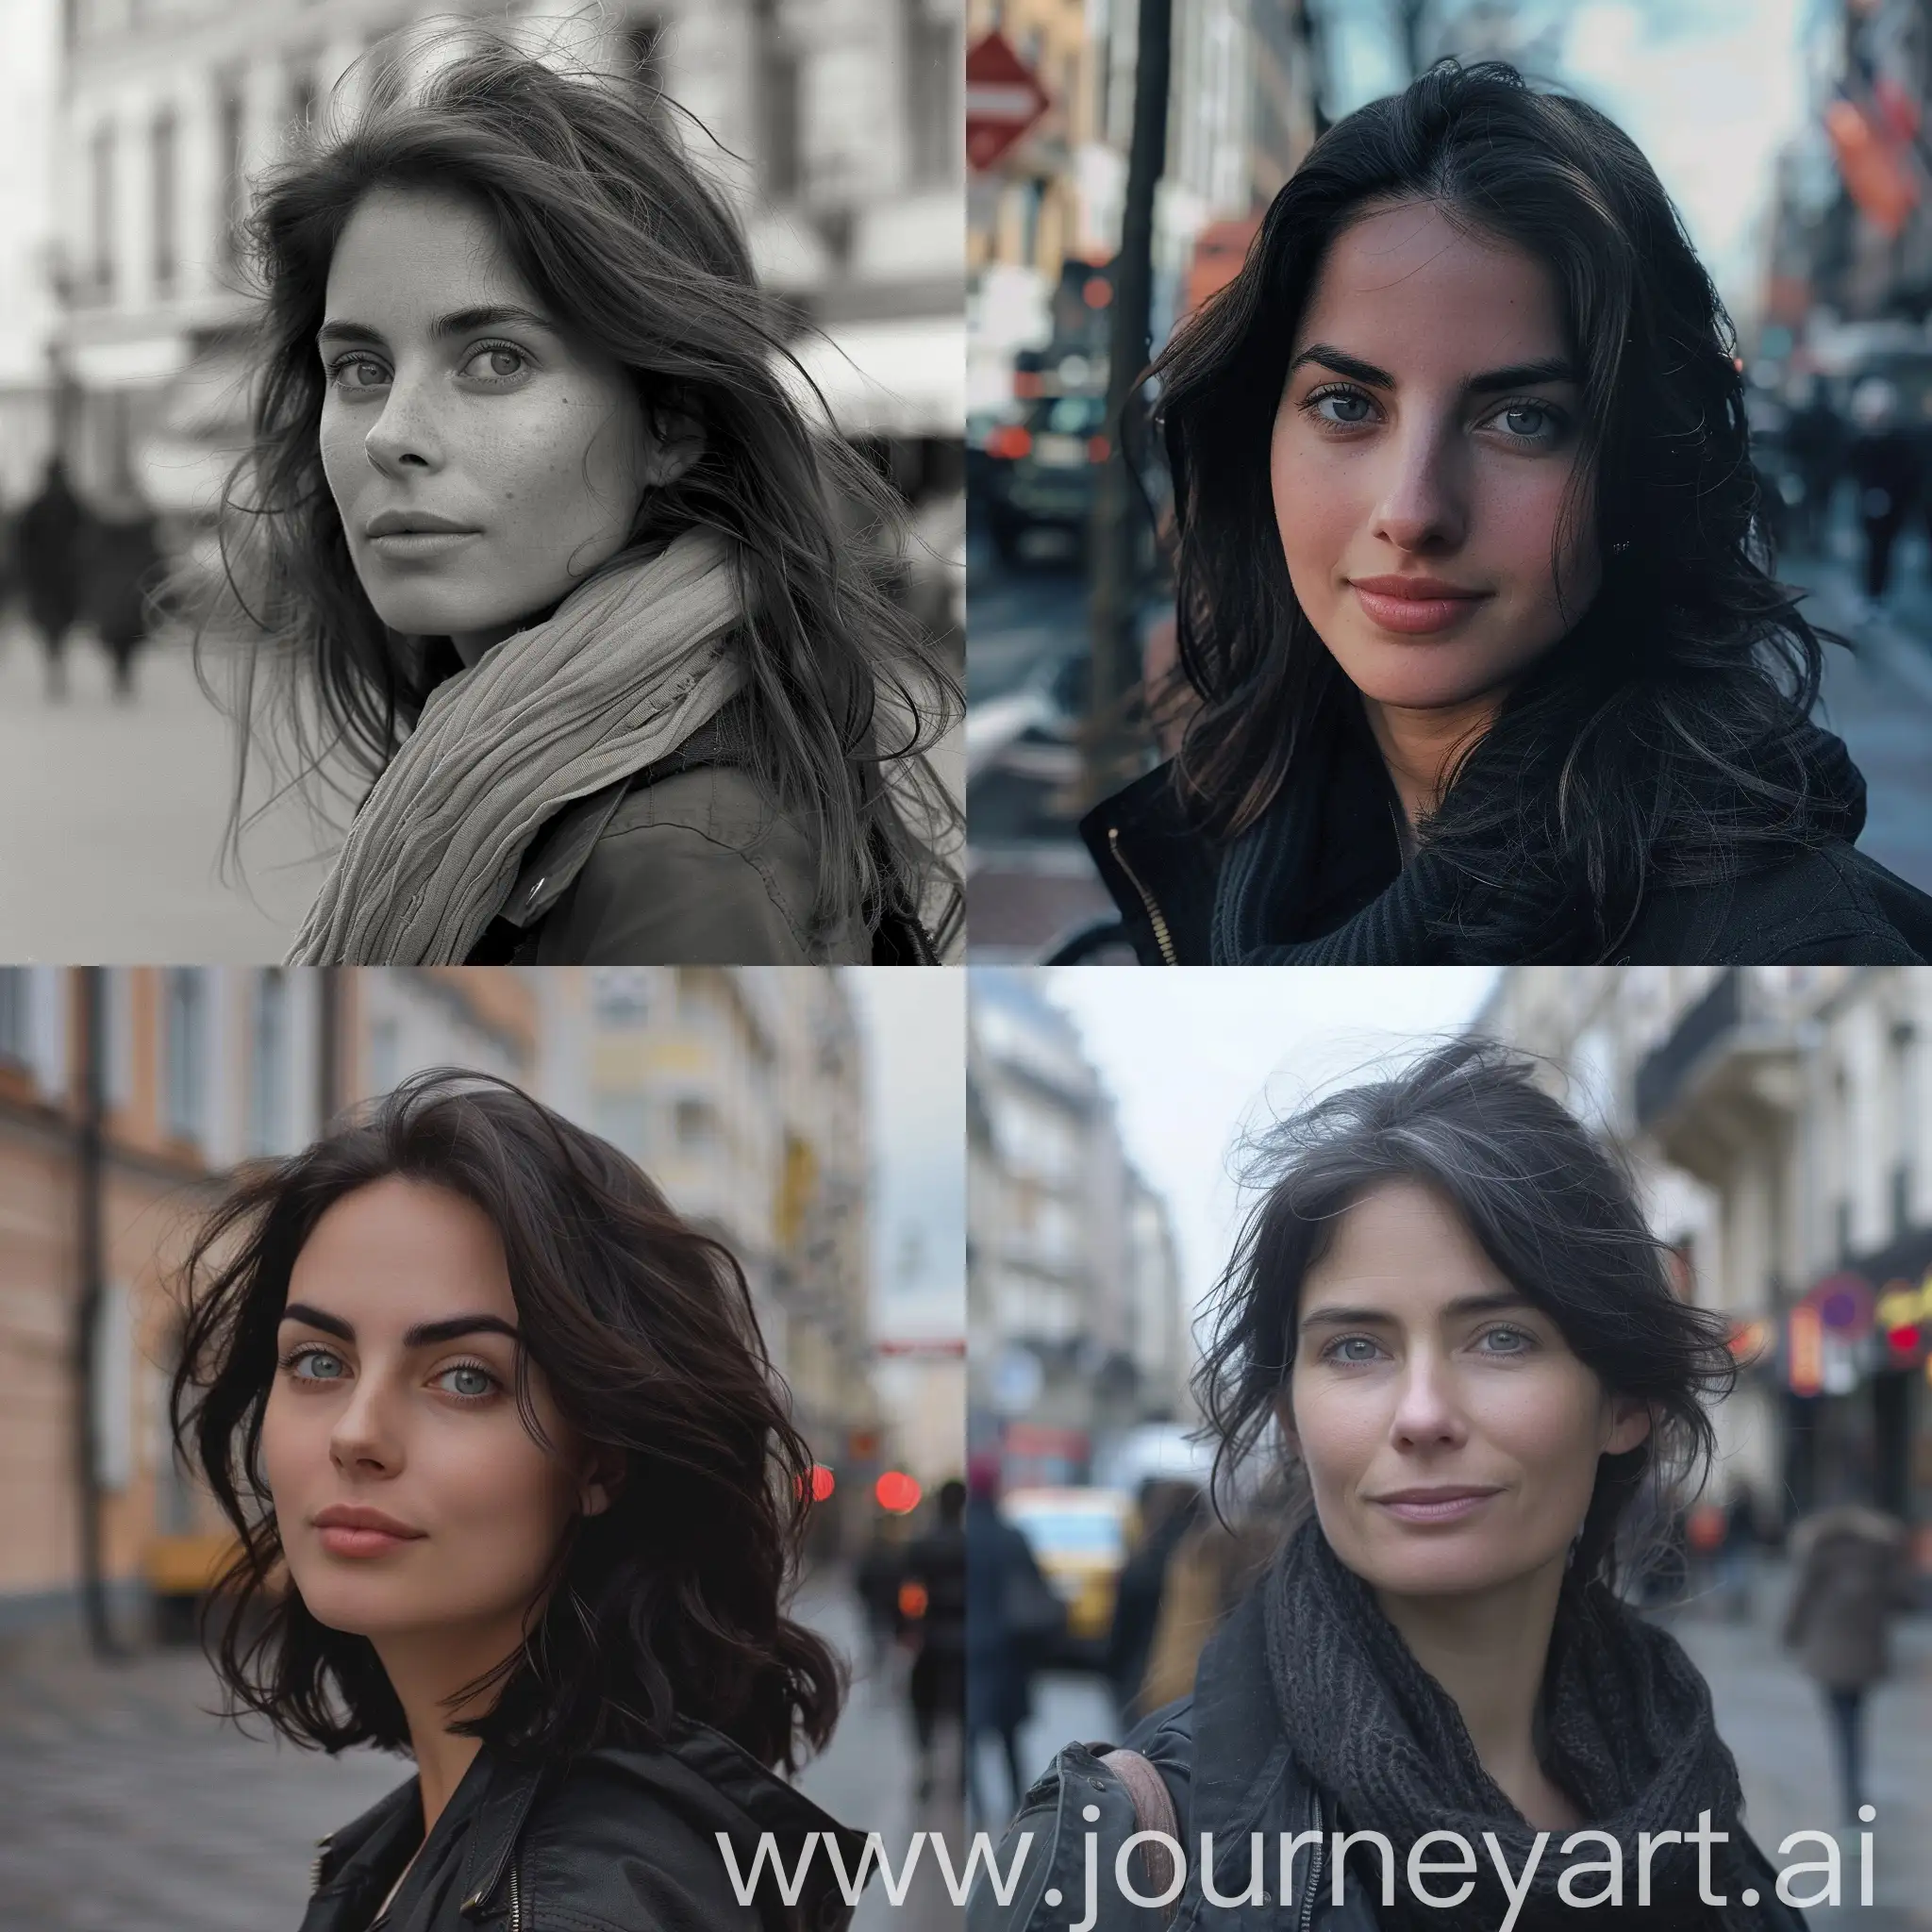 Woman-with-Dark-Hair-and-Gray-Eyes-Walking-on-the-Street